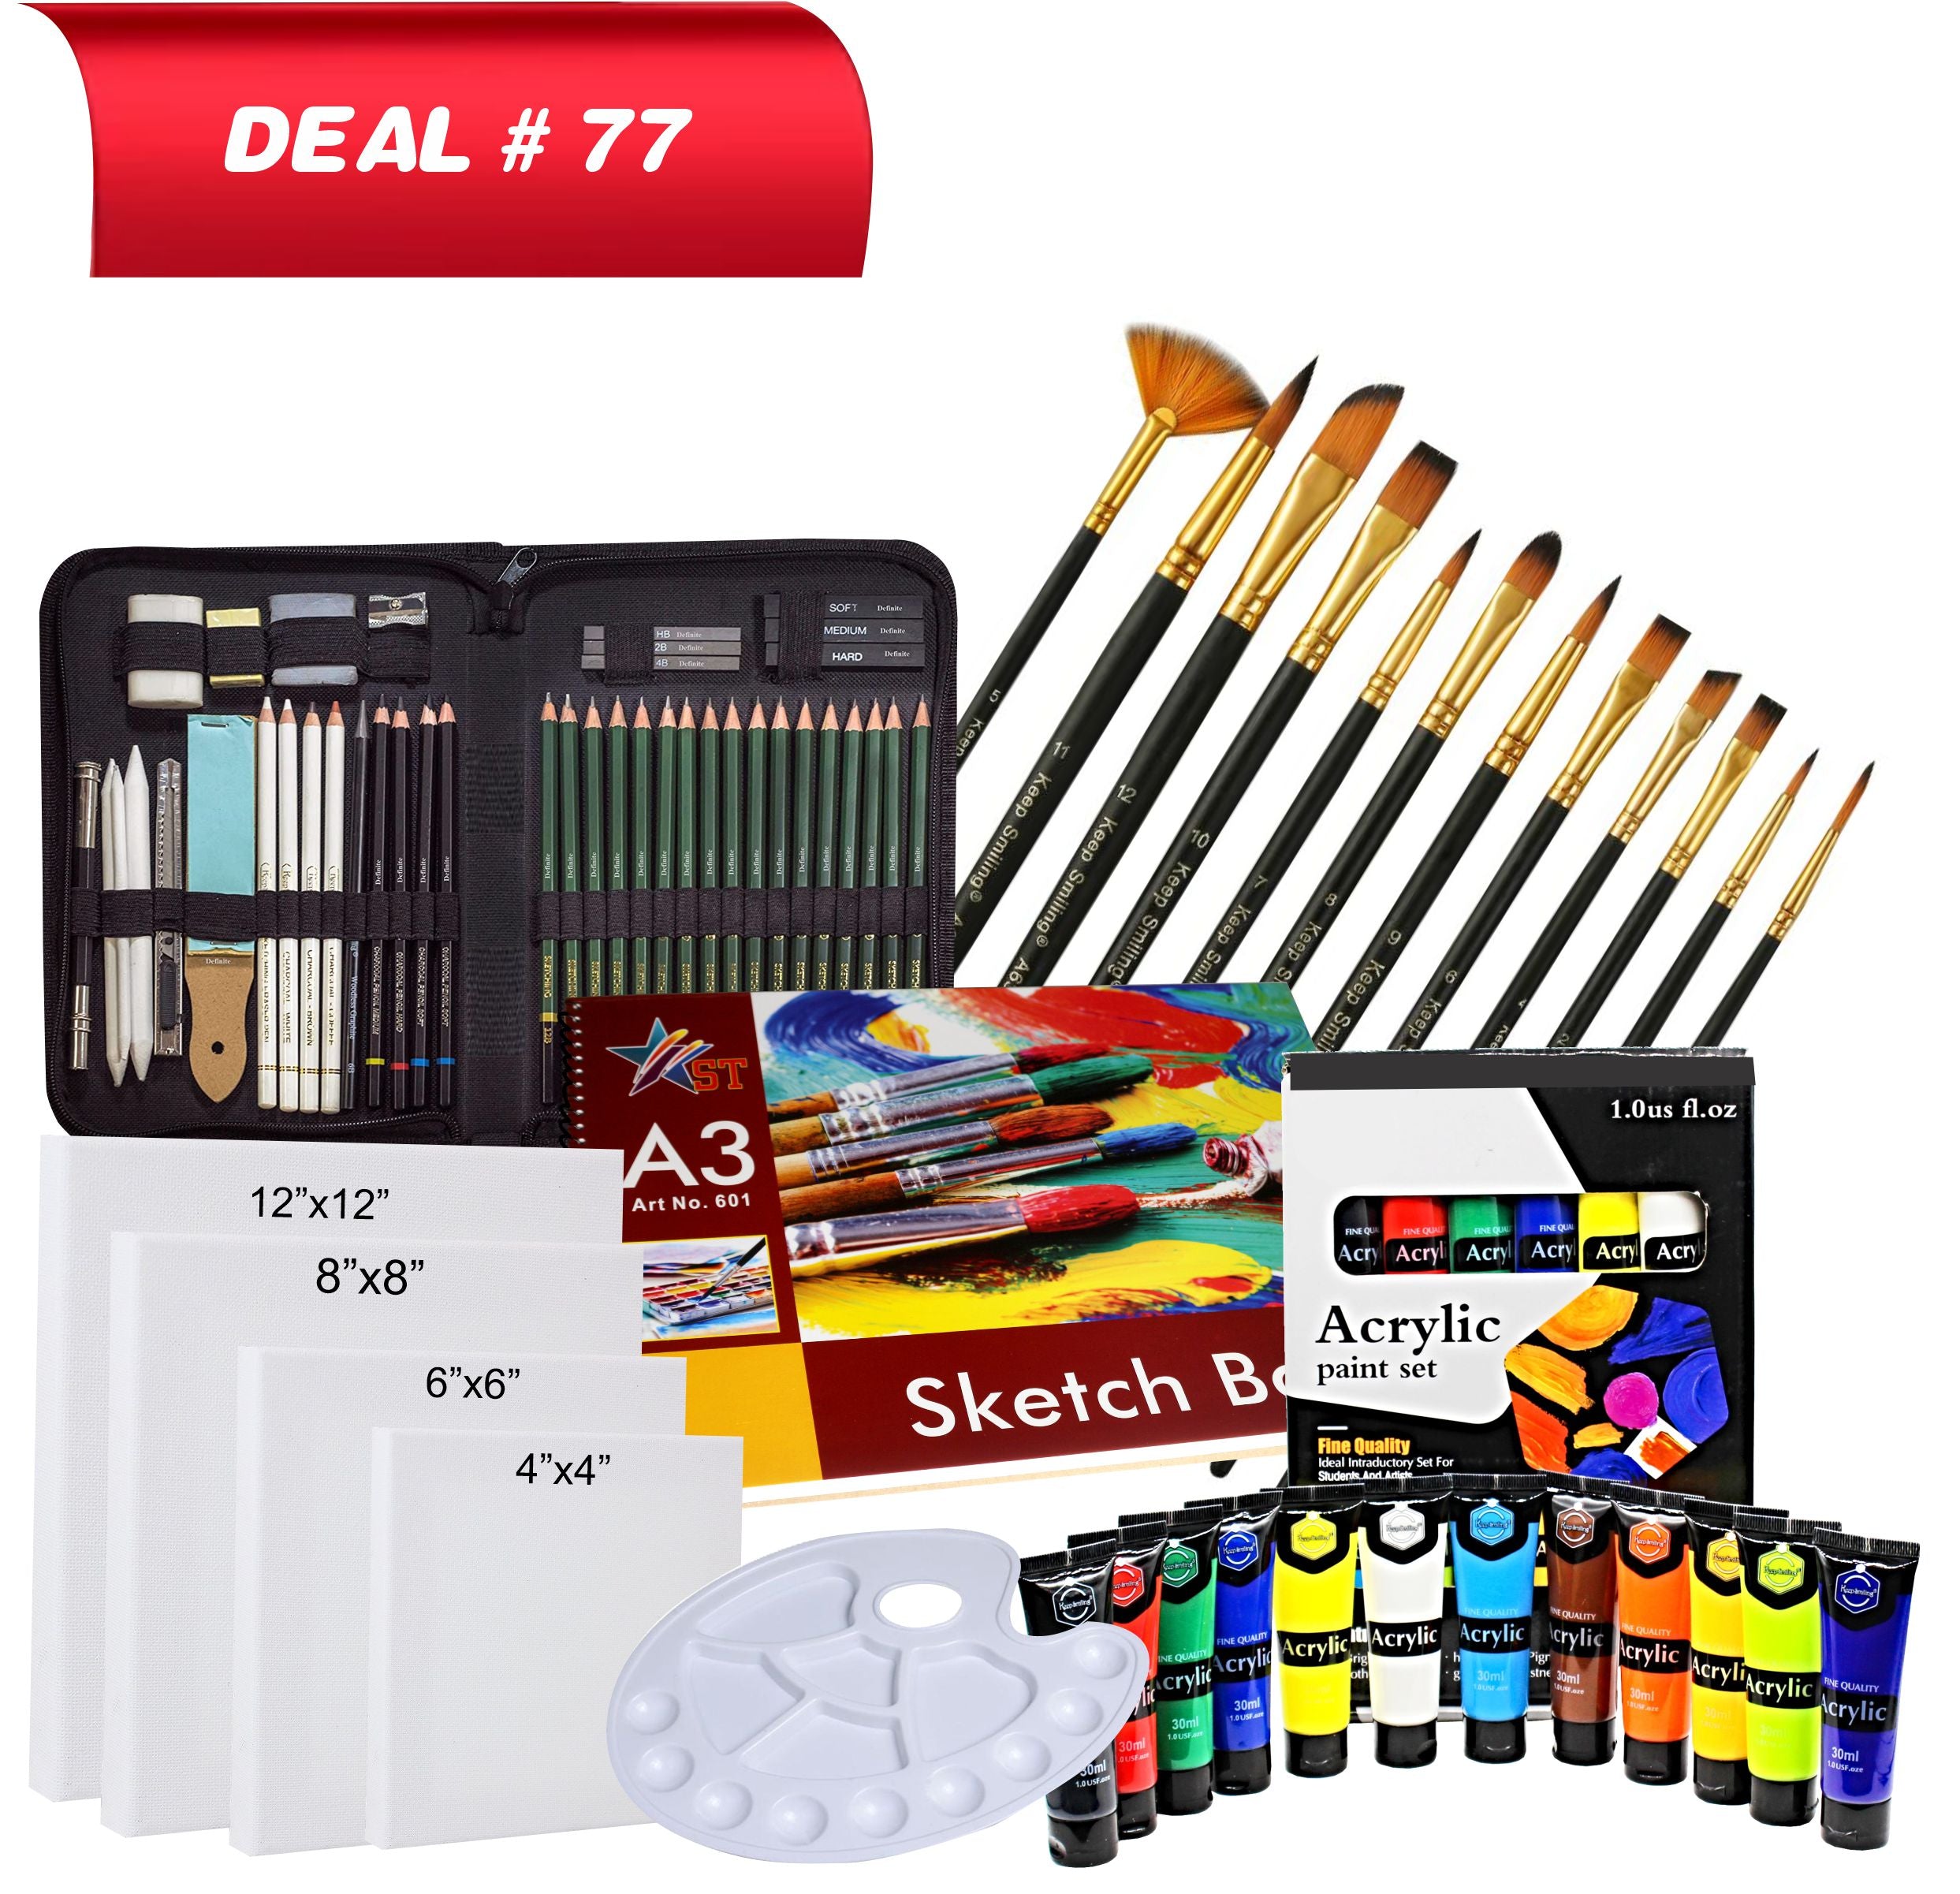 Sketching & Acrylic Kit For Professional Artist's, Deal No.77